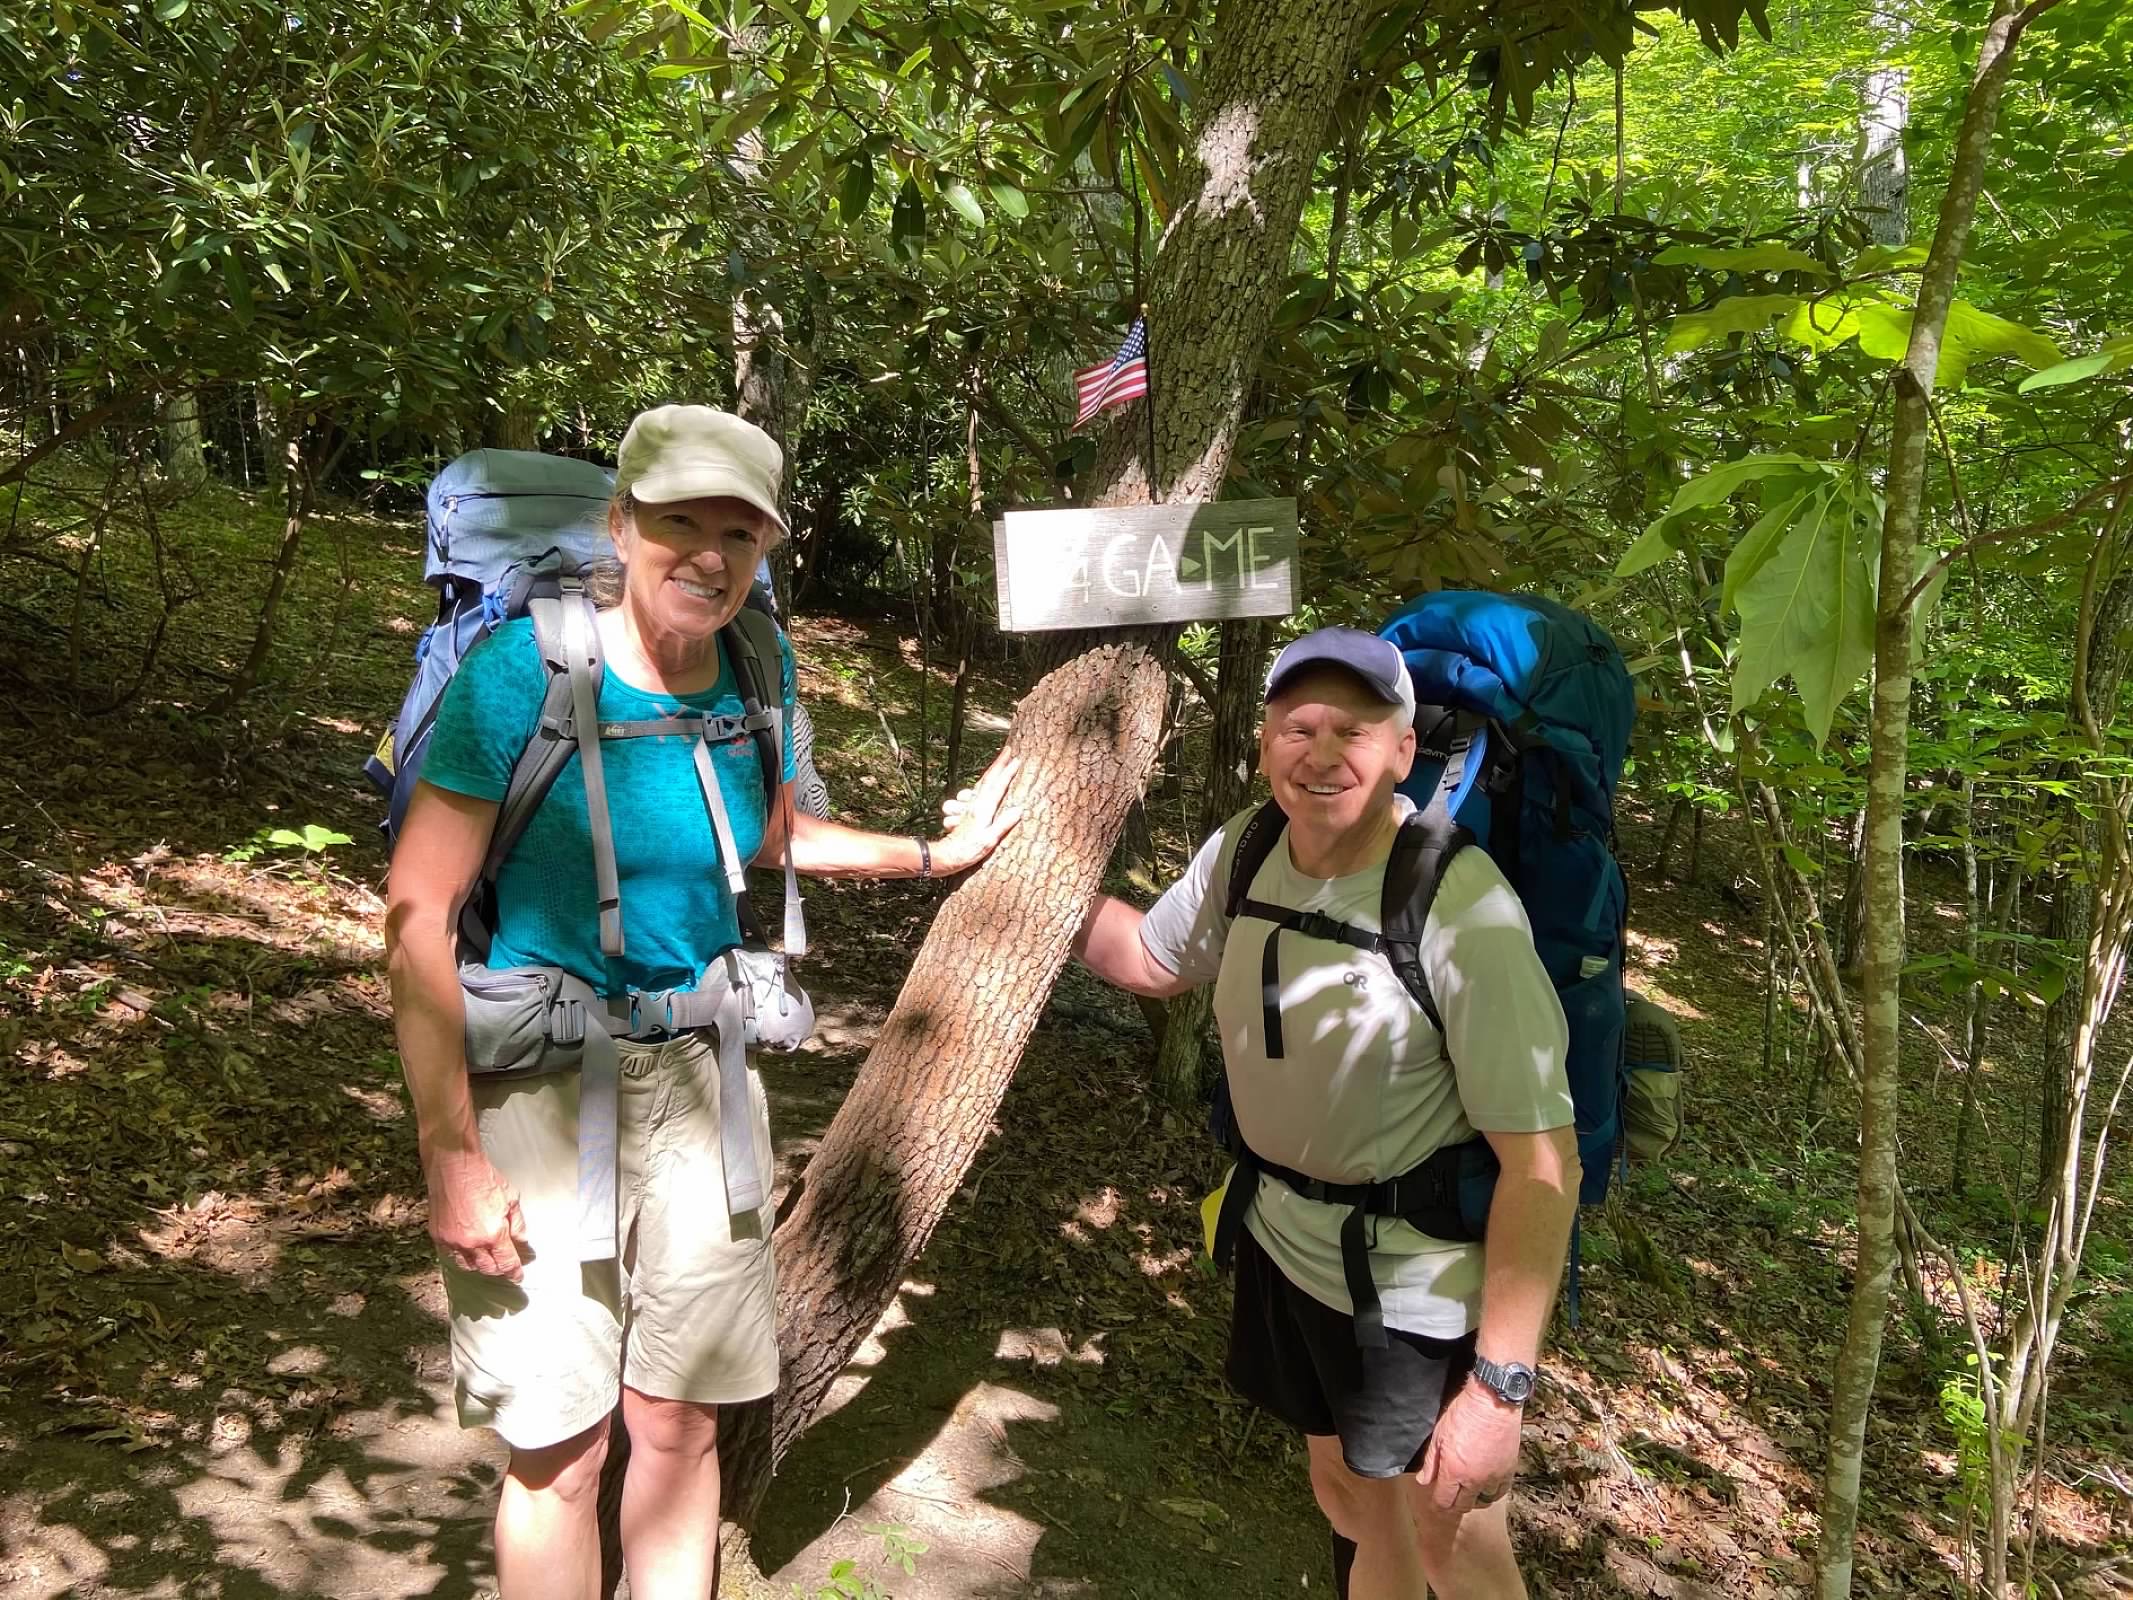 Jean (Geiger) Bussell '74 with her husband Buddy on the Appalachian Trail